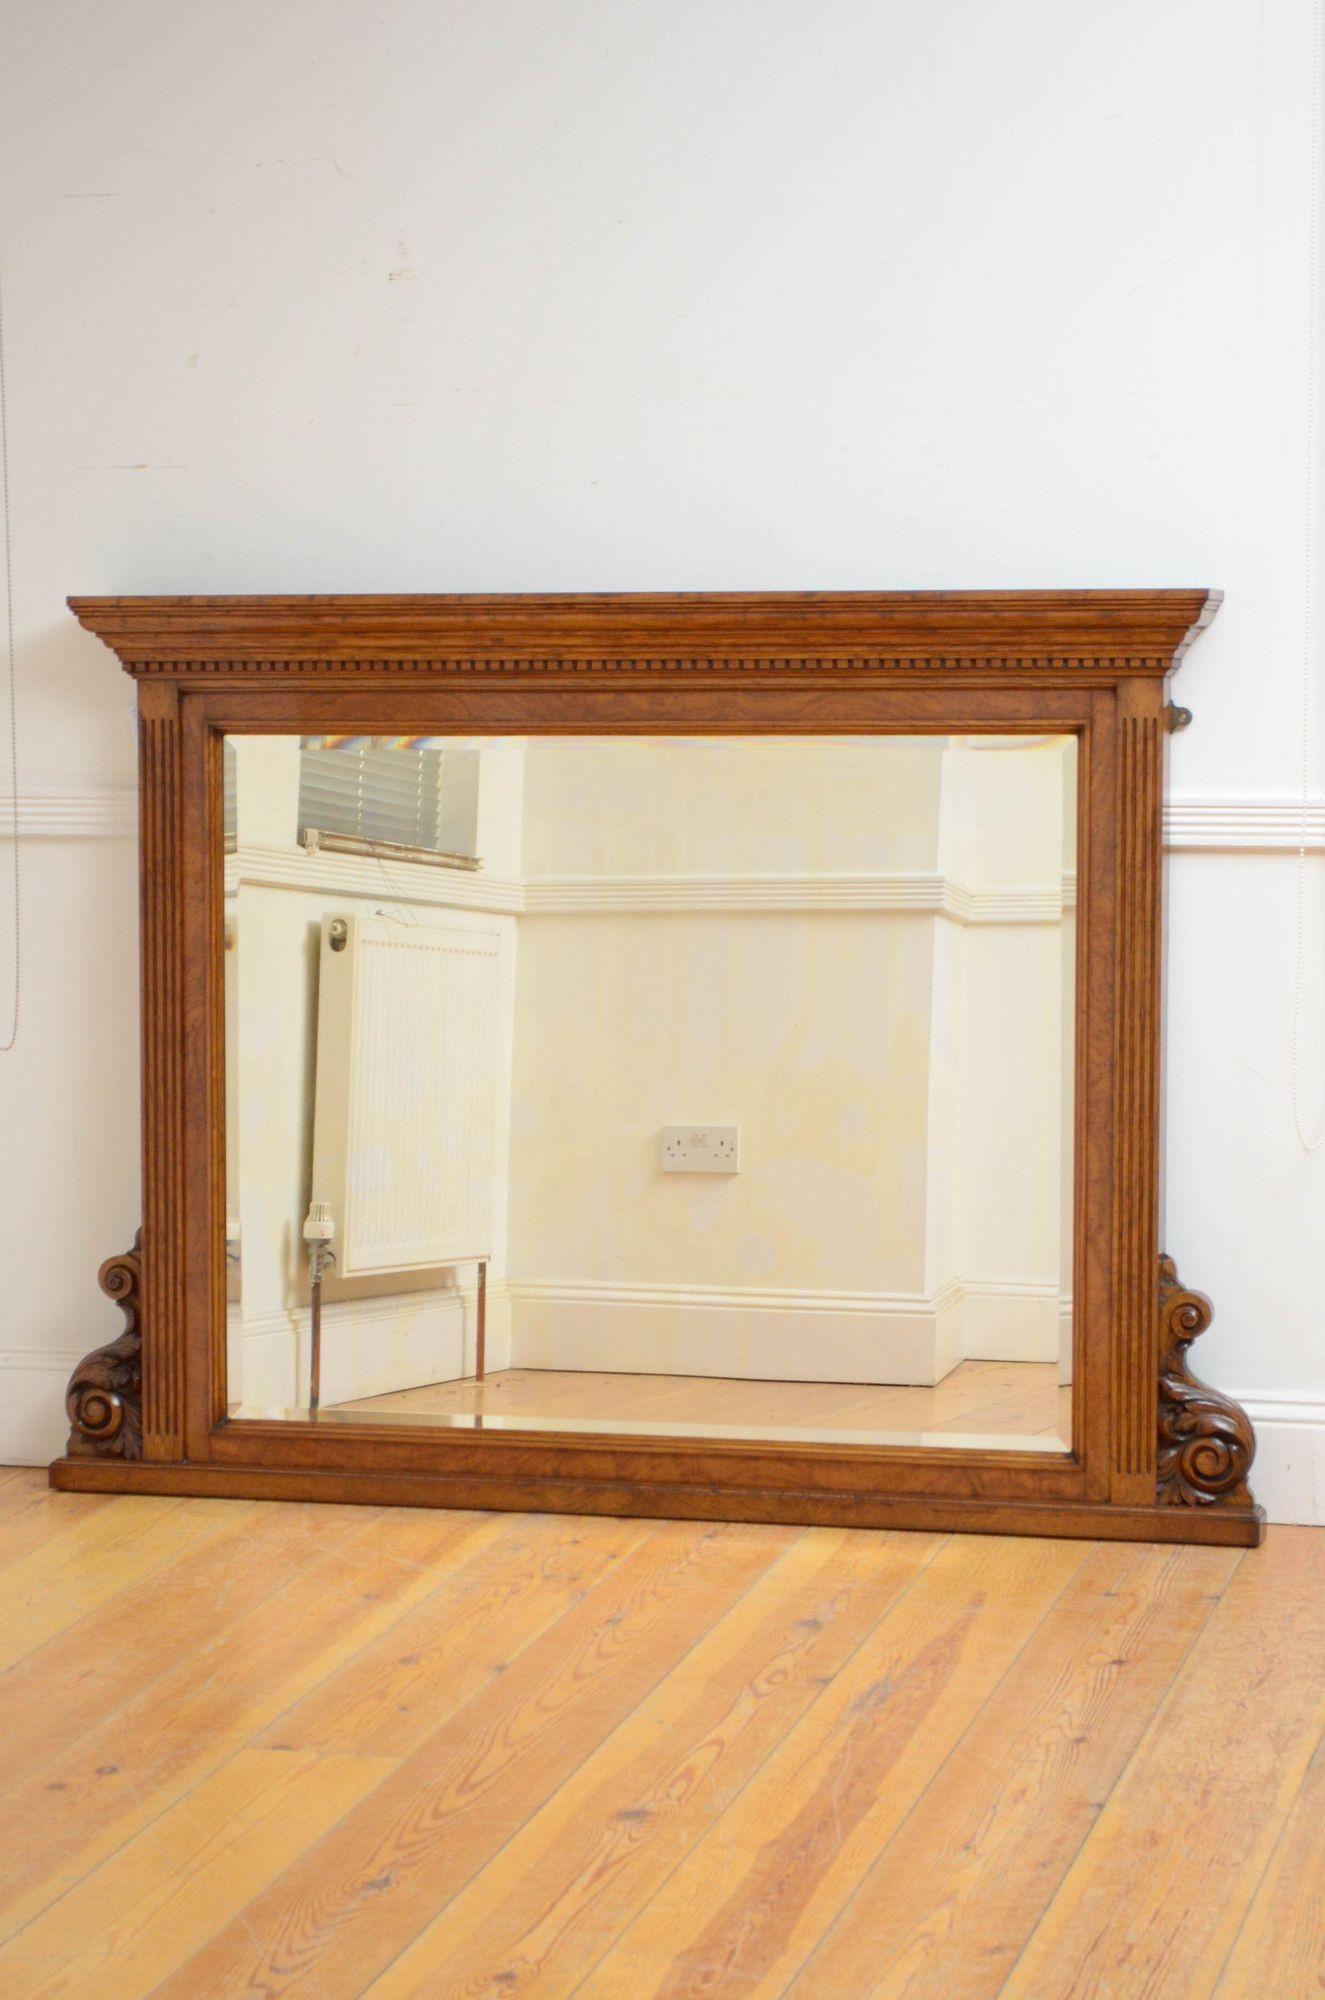 Sn5235 Superior quality Victorian pollard oak overmantle mirror, having original bevelled edge glass flanked by reeded pilasters, cavetto cornice with dentil carved frieze and acanthus carved scrolls to the base. This antique mirror is in original